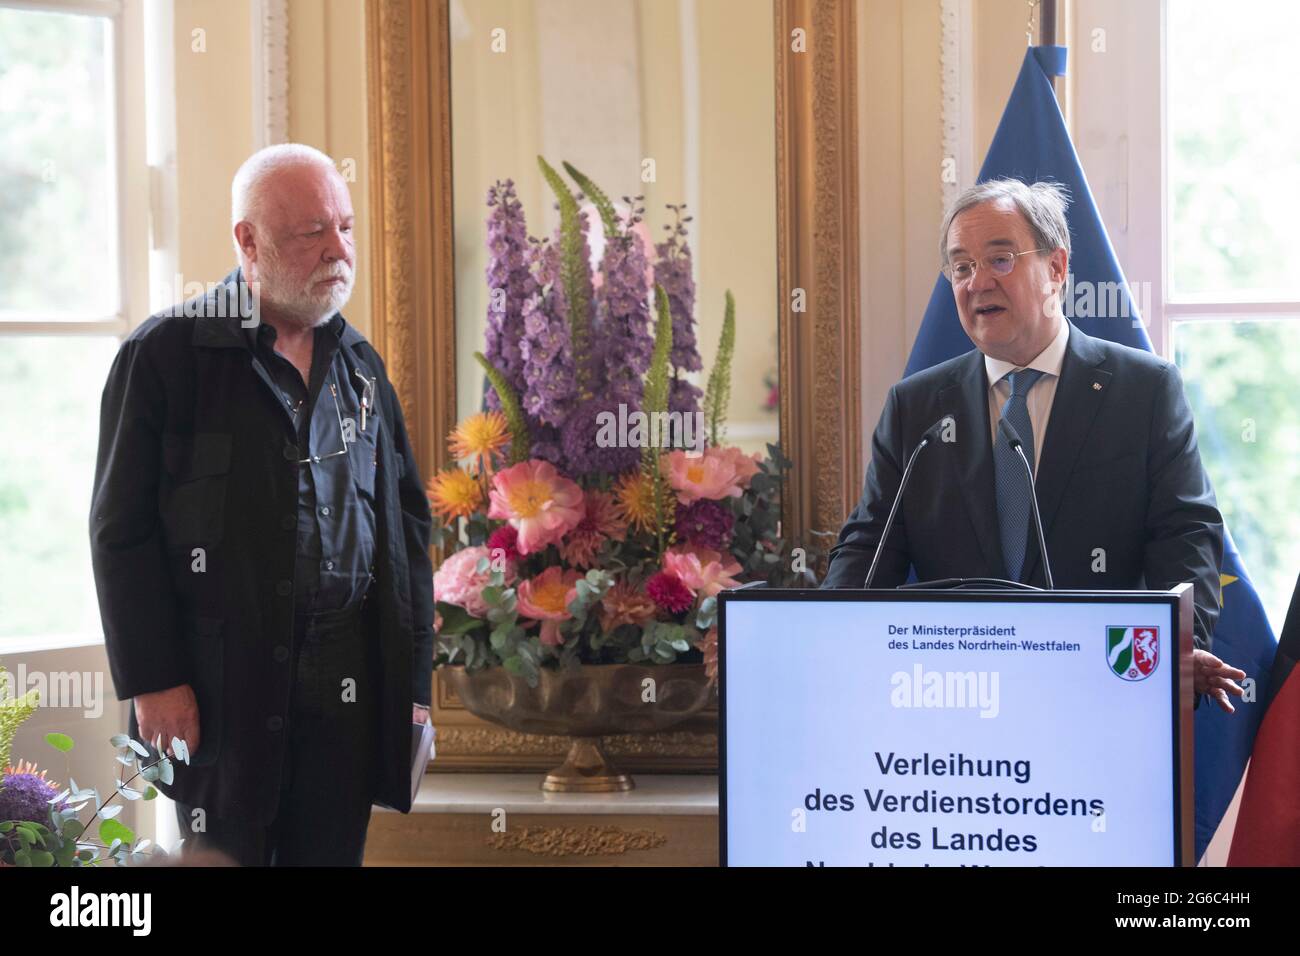 Duesseldorf, Deutschland. 28th June, 2021. Prime Minister Armin LASCHET honors the artist Otmar ALT, Prime Minister Armin Laschet honors citizens of North Rhine-Westphalia for their exceptional commitment to society with the Order of Merit of the State, award of the Order of Merit of the State of North Rhine-Westphalia in Duesseldorf on June 28, 2021 ÃÂ Credit: dpa/Alamy Live News Stock Photo